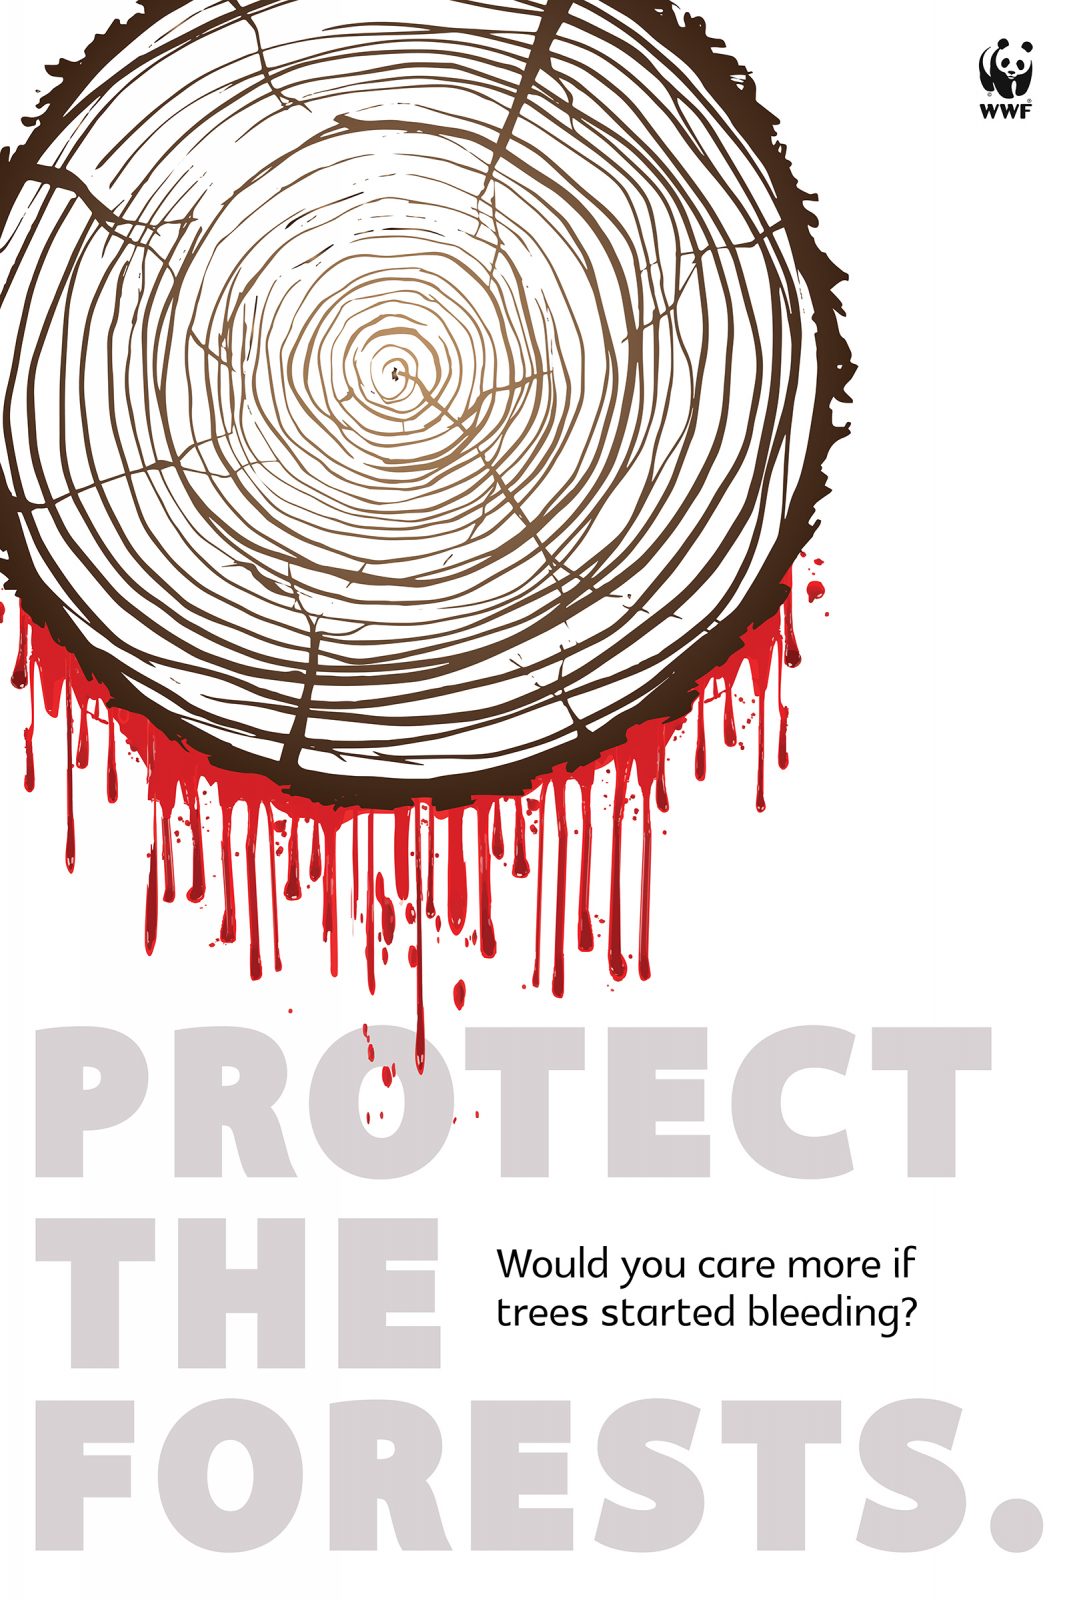 Print advertising to Protect the forests by artist Unnati Sharma